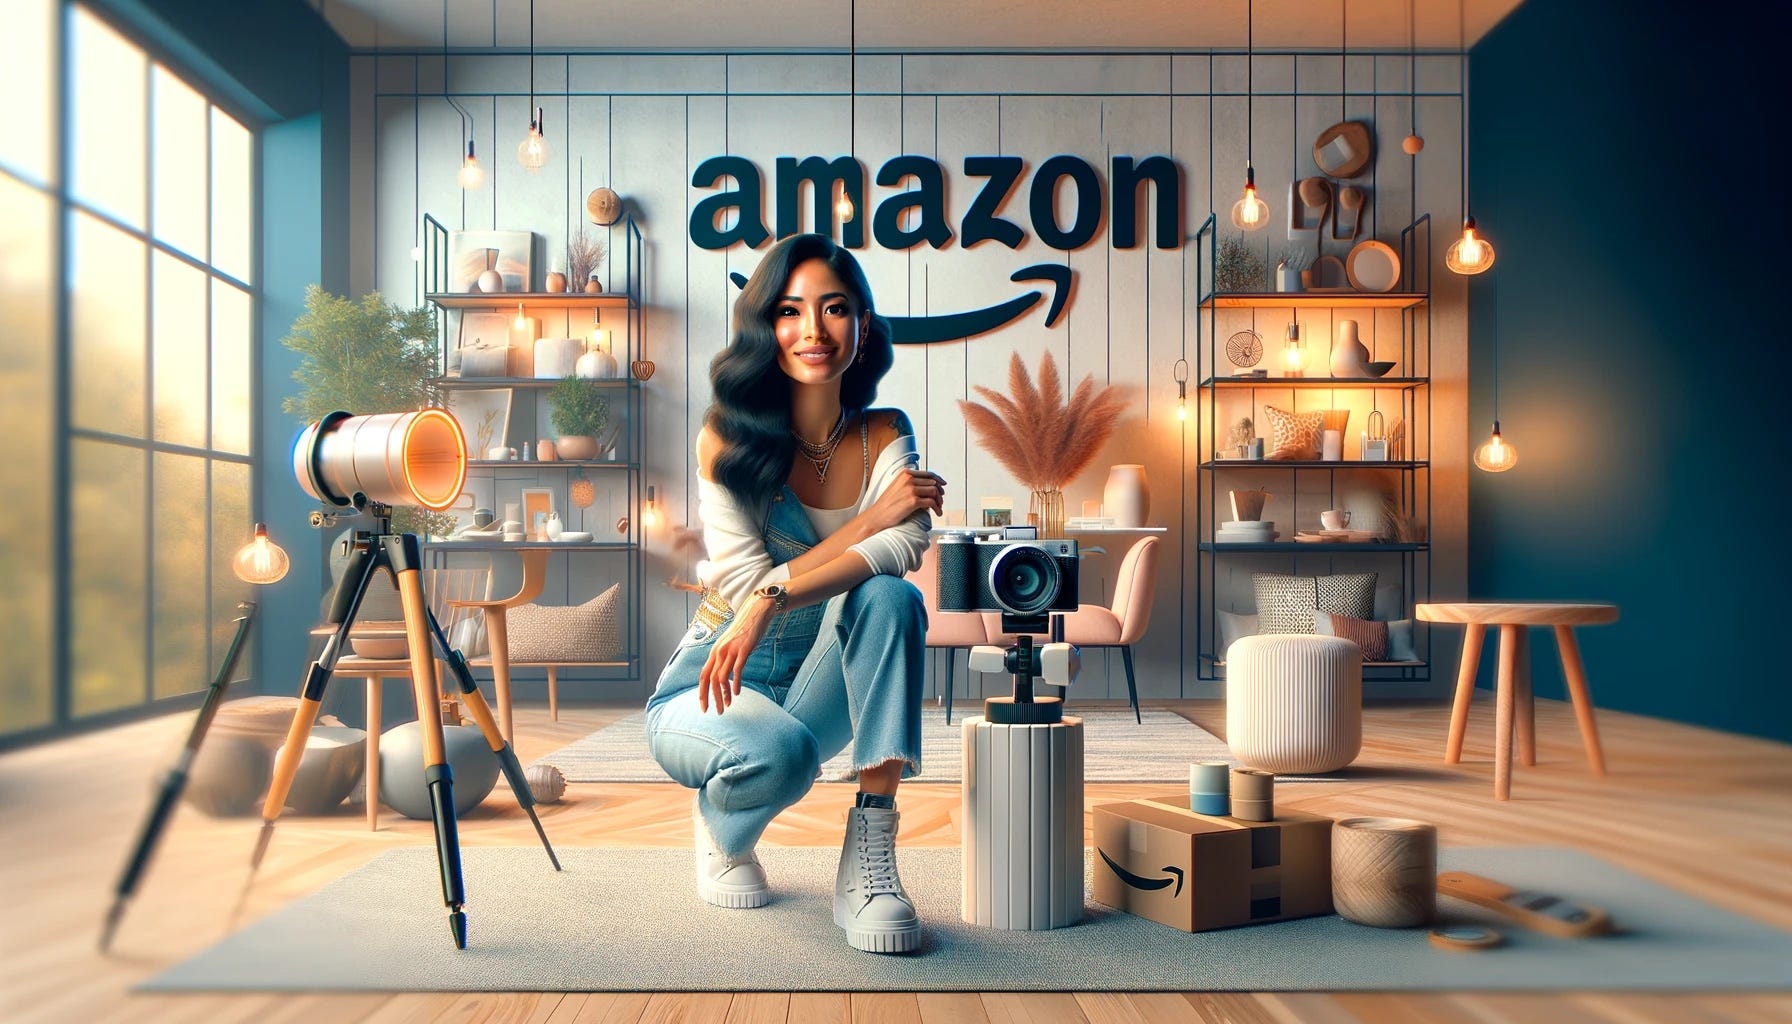 Amazon’s Influencer-Driven Live-Streaming Strategy Redefines the Shopping Experience